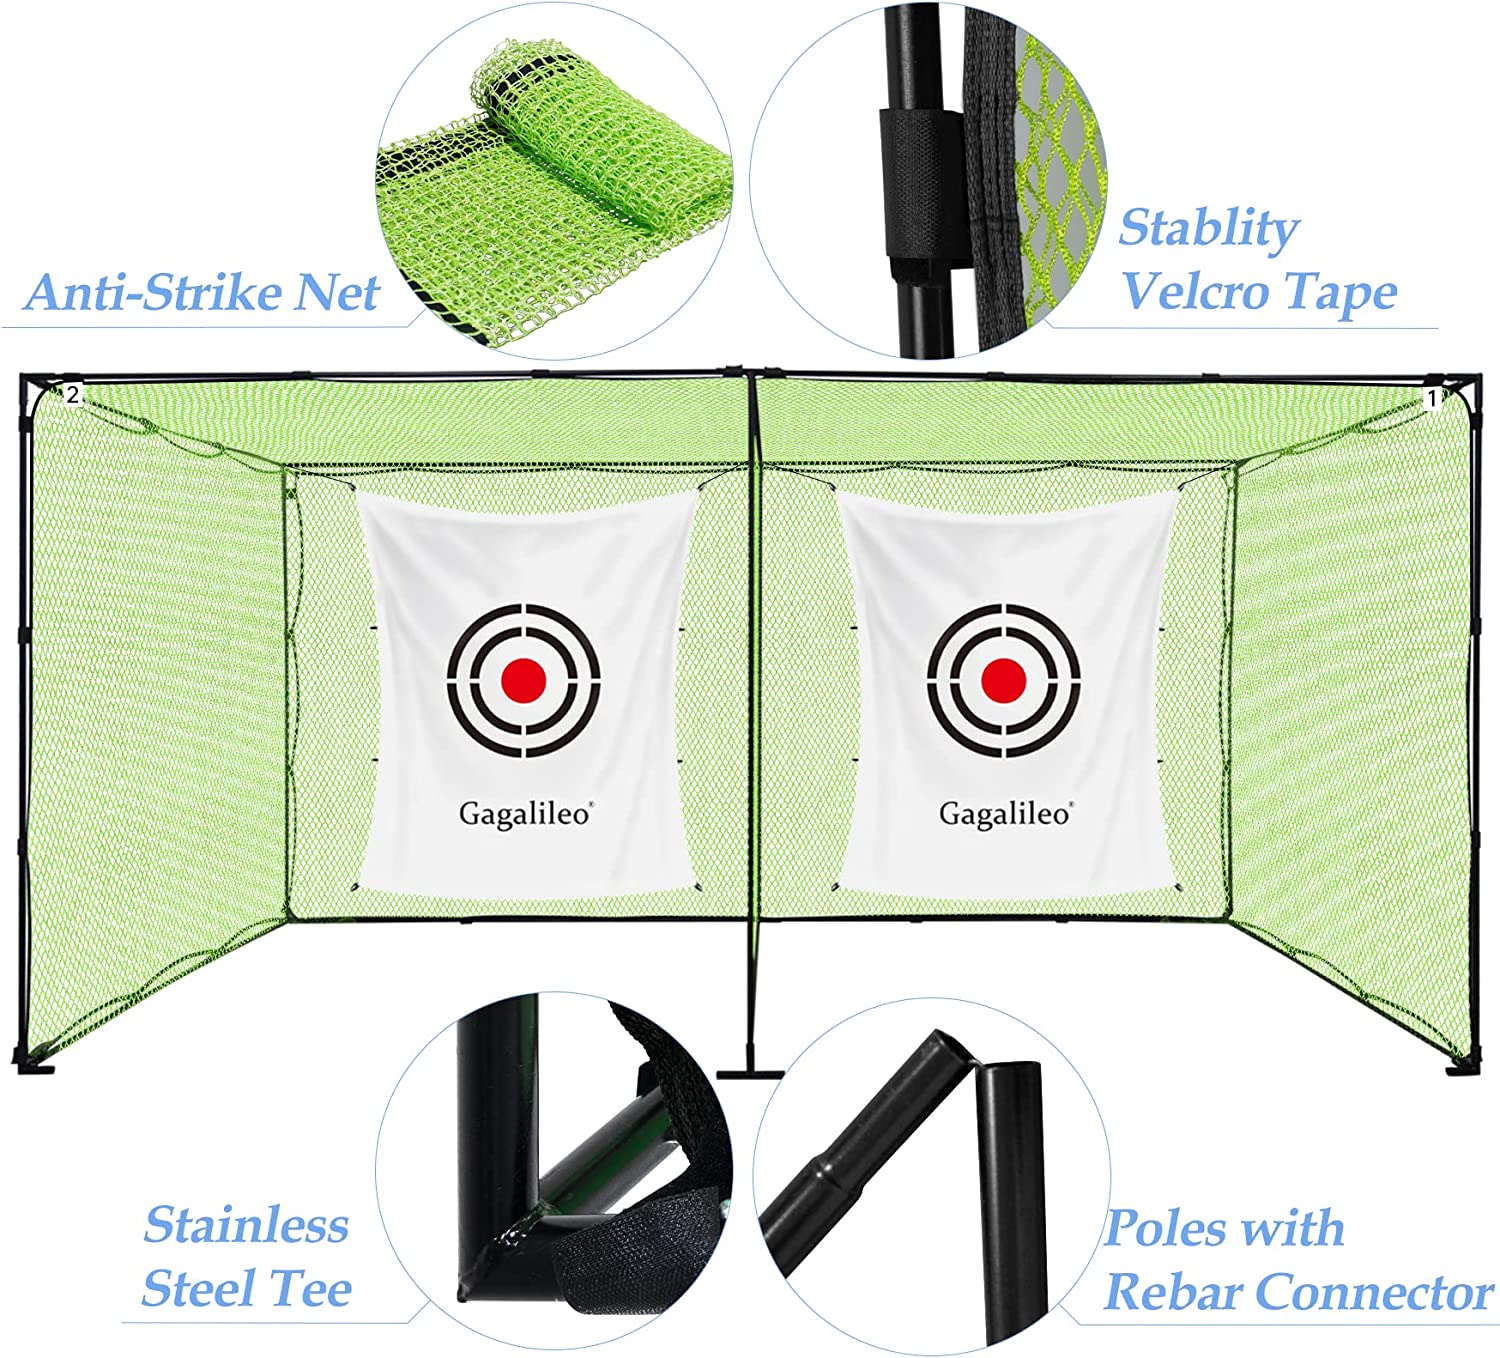 Heavy Duty Golf Cage Netting System - Perfect for Backyard Driving Practice, Include 2 Cages and Targets - Improve Your Golf Game Skills with 7x14FT Golf Cage